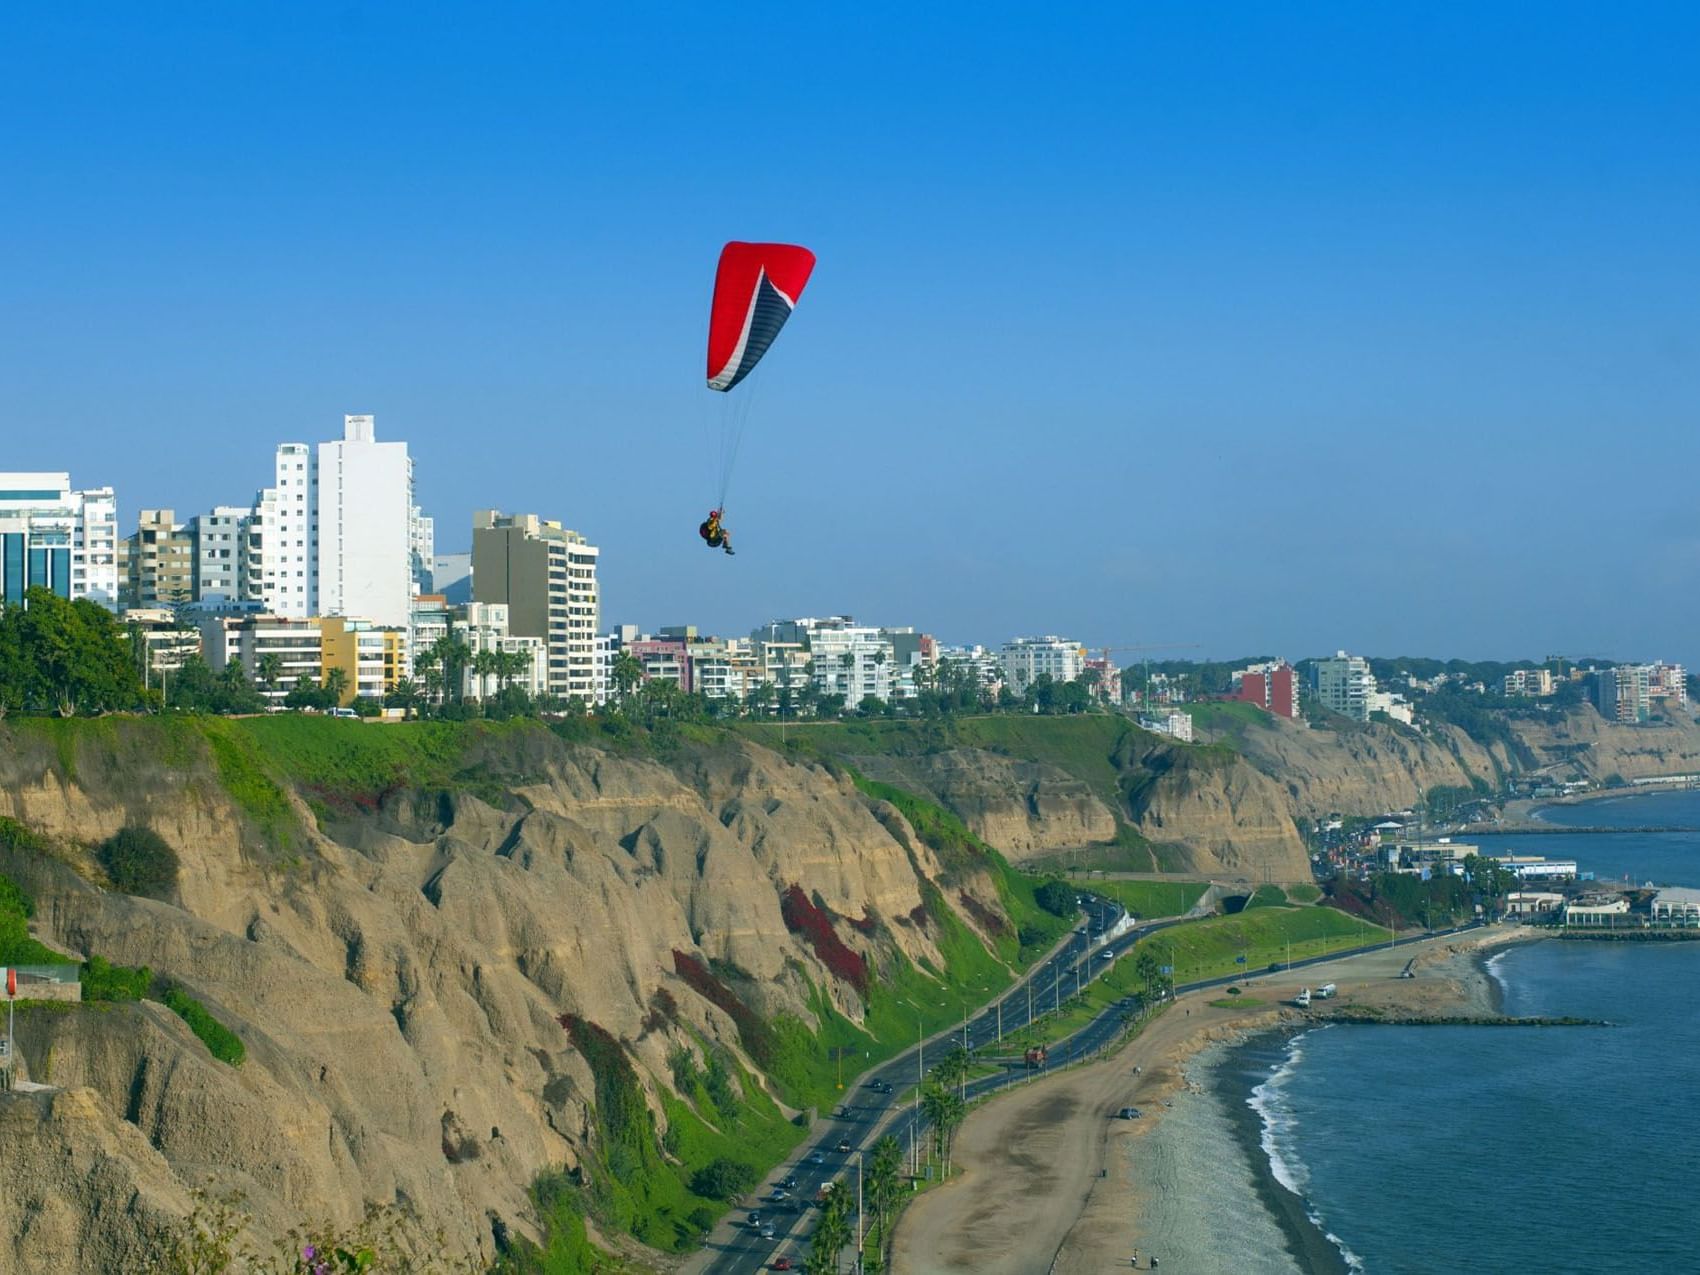 Paragliding over the cliff in Miraflores near Suites Larco 656